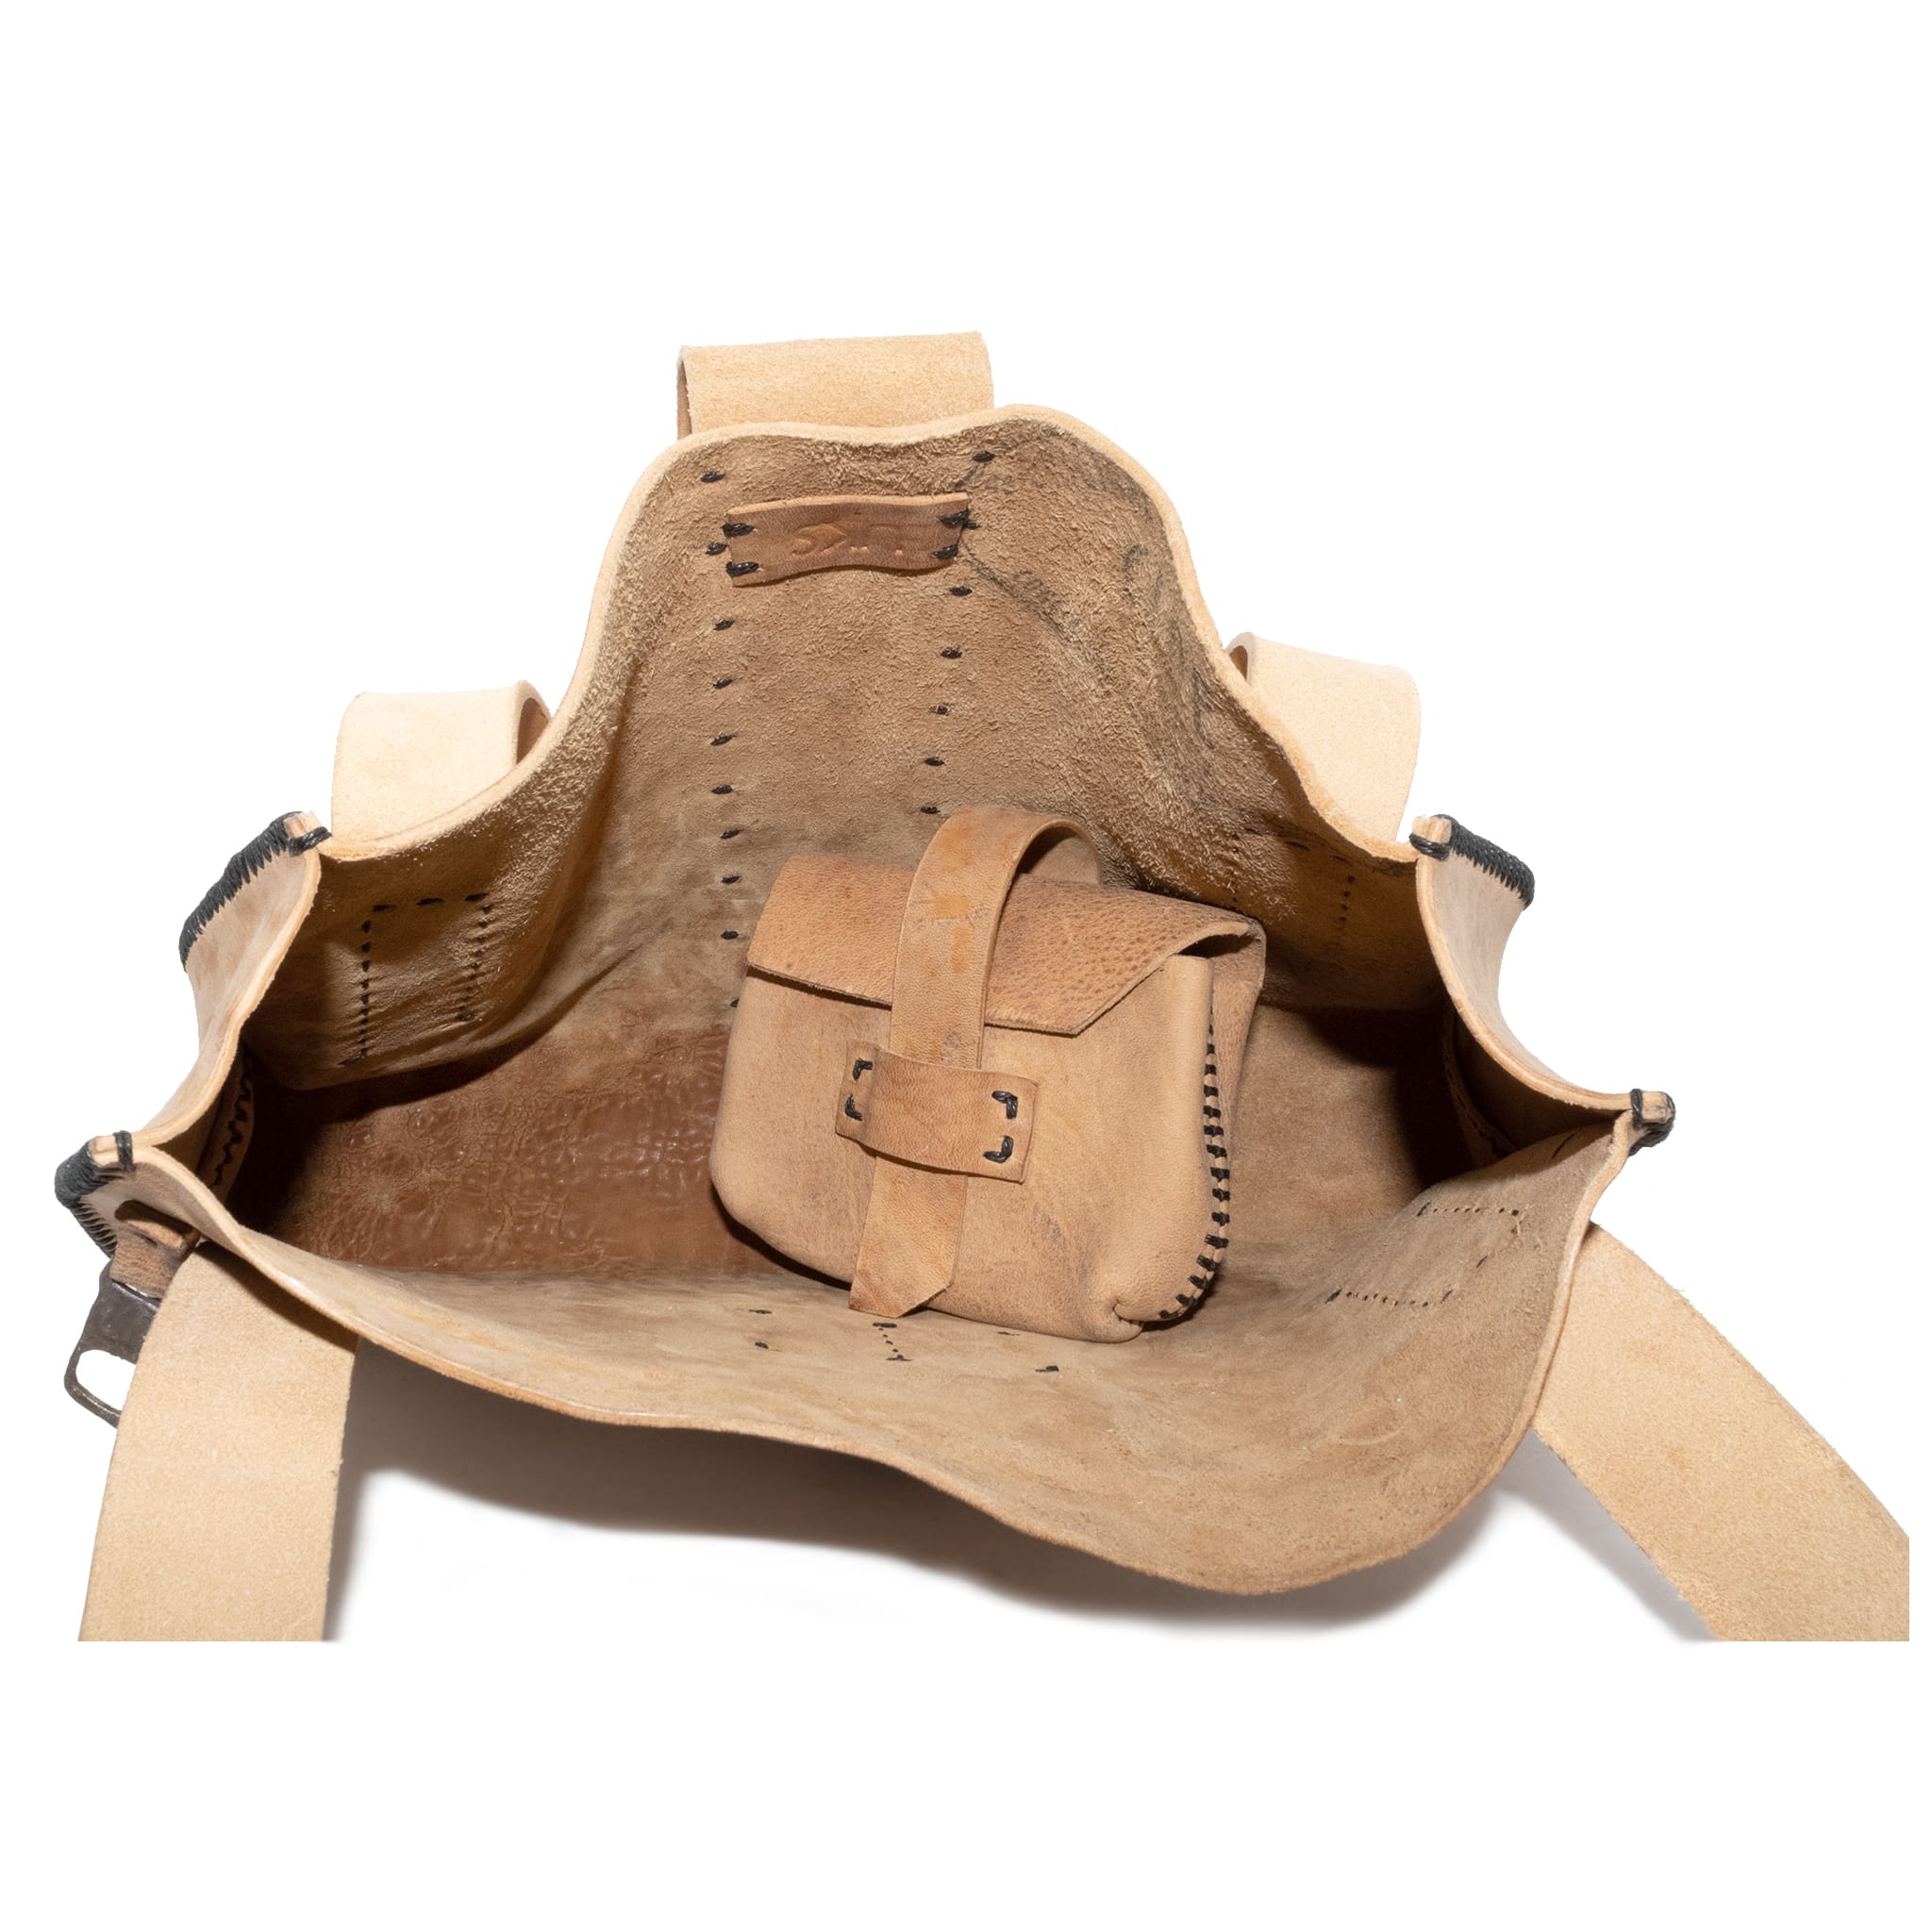 avant garde hand sewn leather handbag from atelier skn available to buy online.